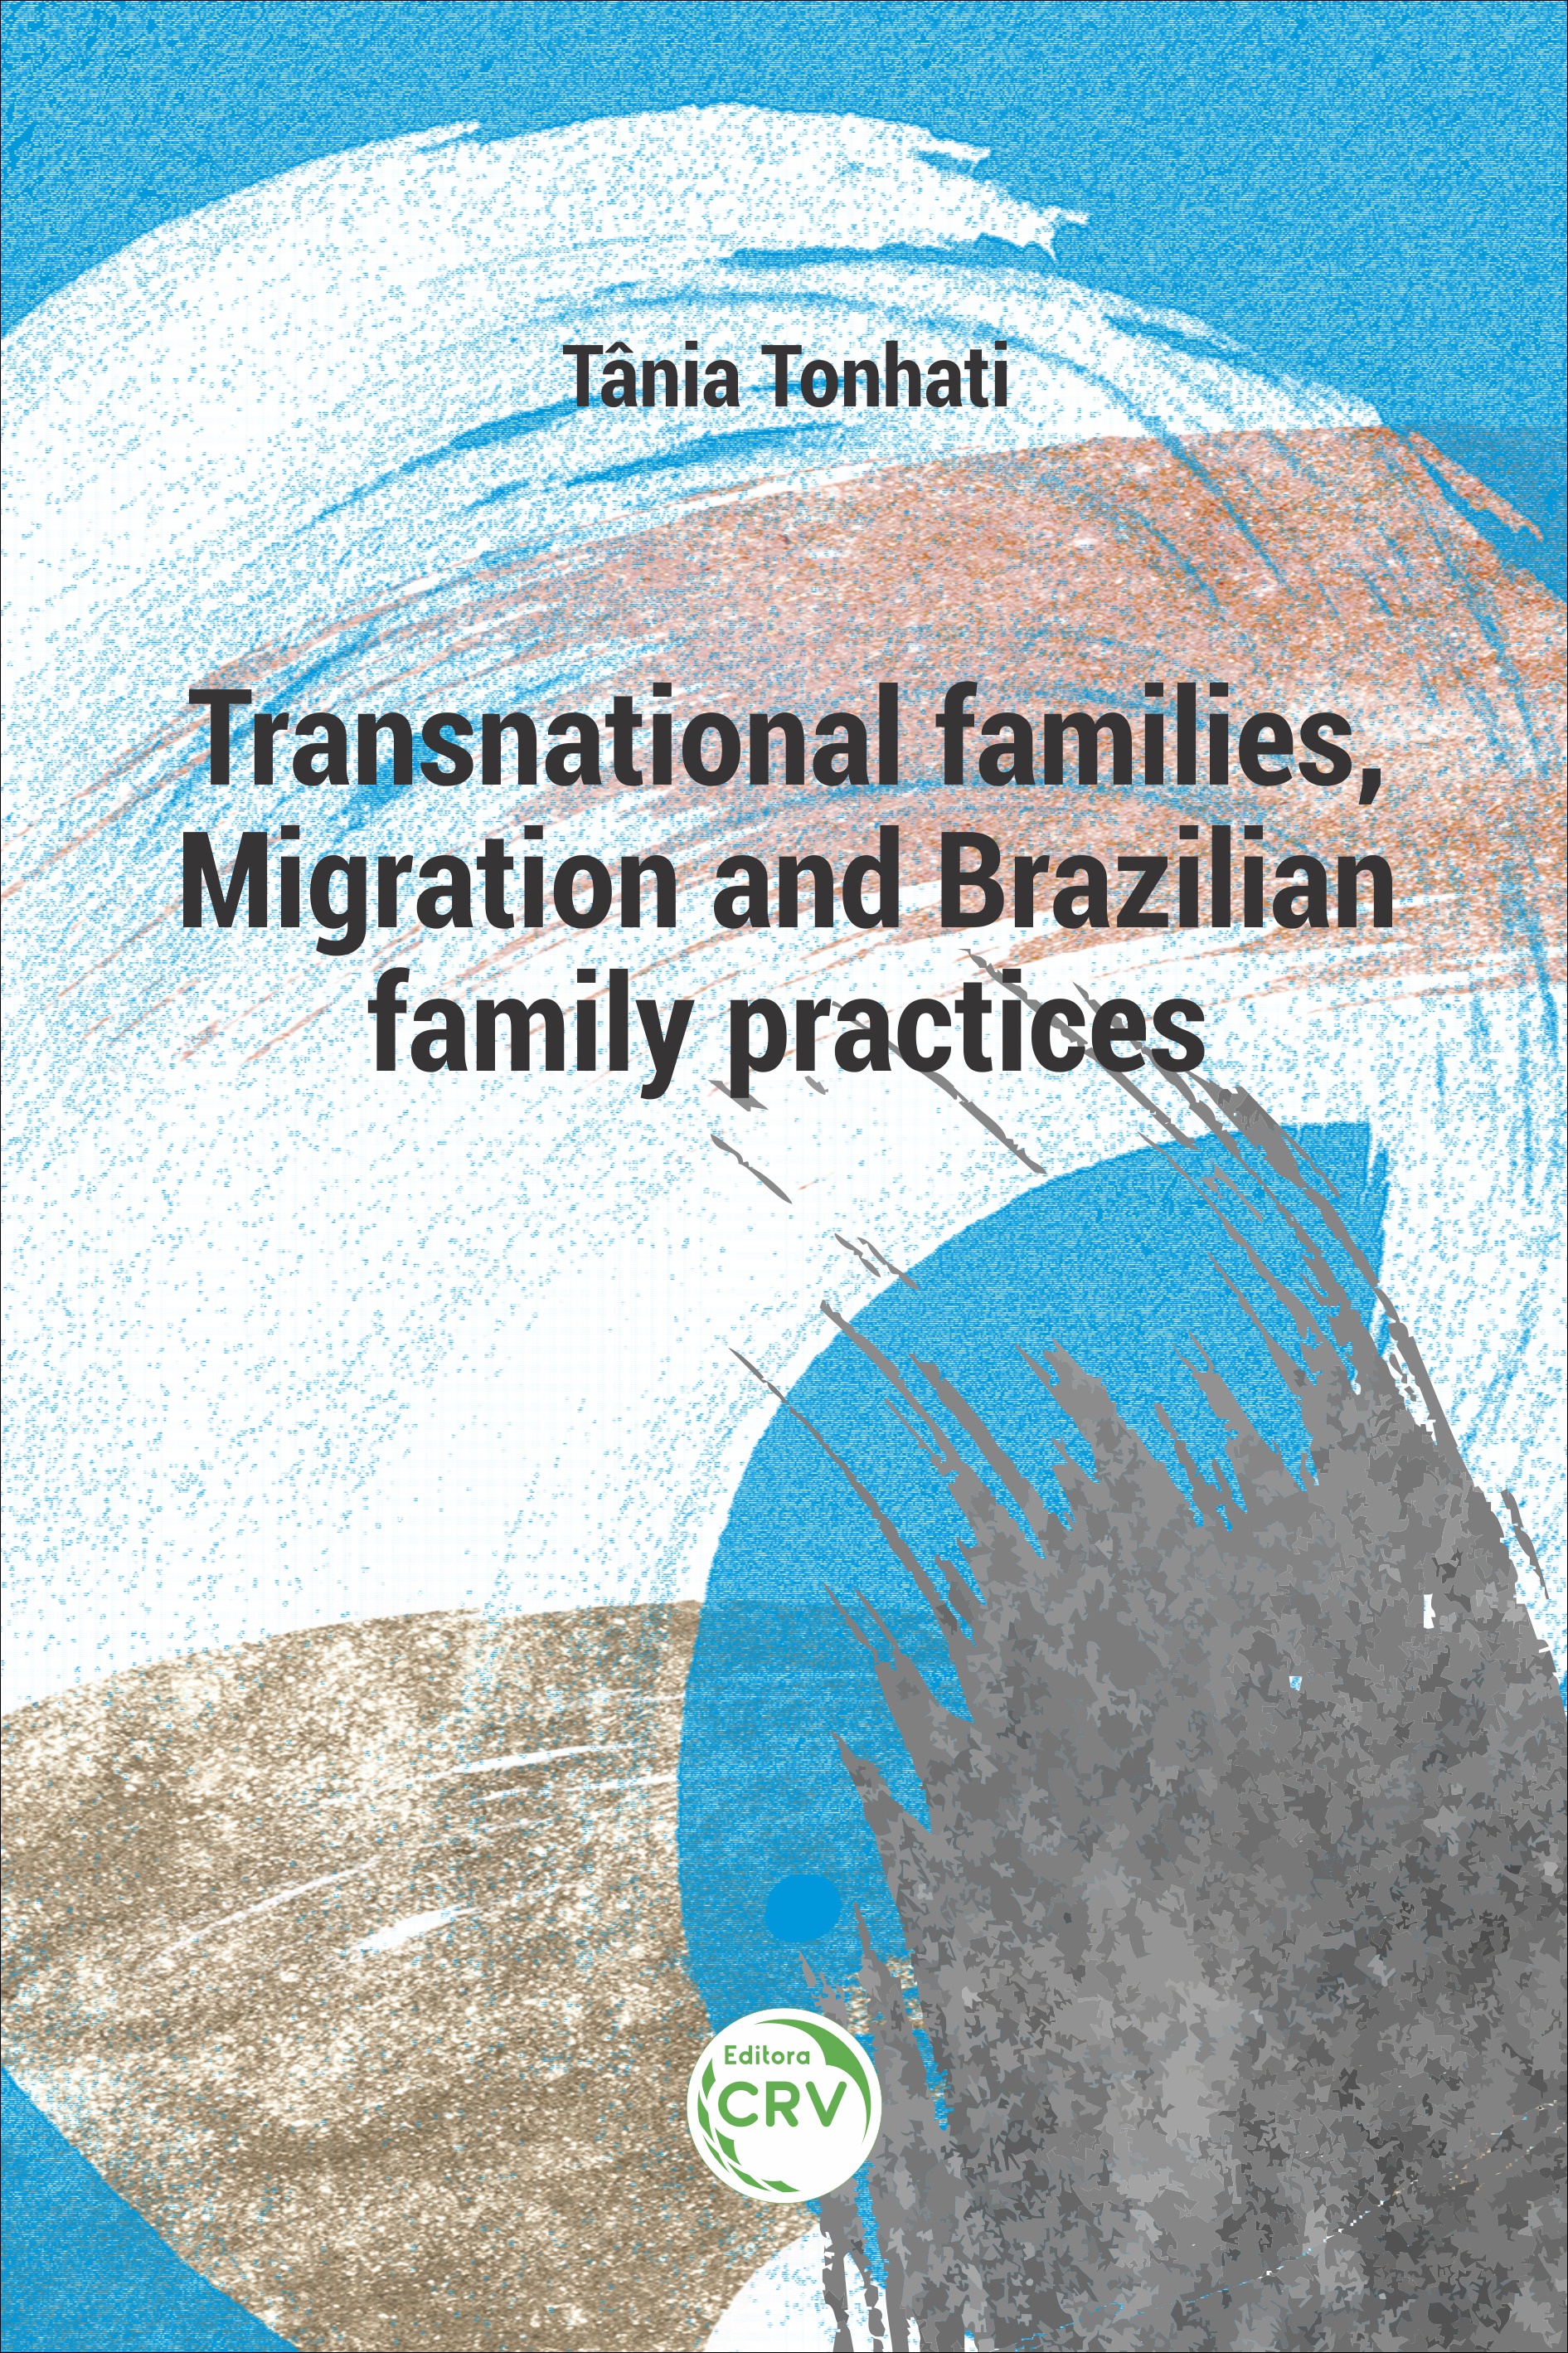 Capa do livro: TRANSNATIONAL FAMILIES, MIGRATION AND BRAZILIAN FAMILY PRACTICES